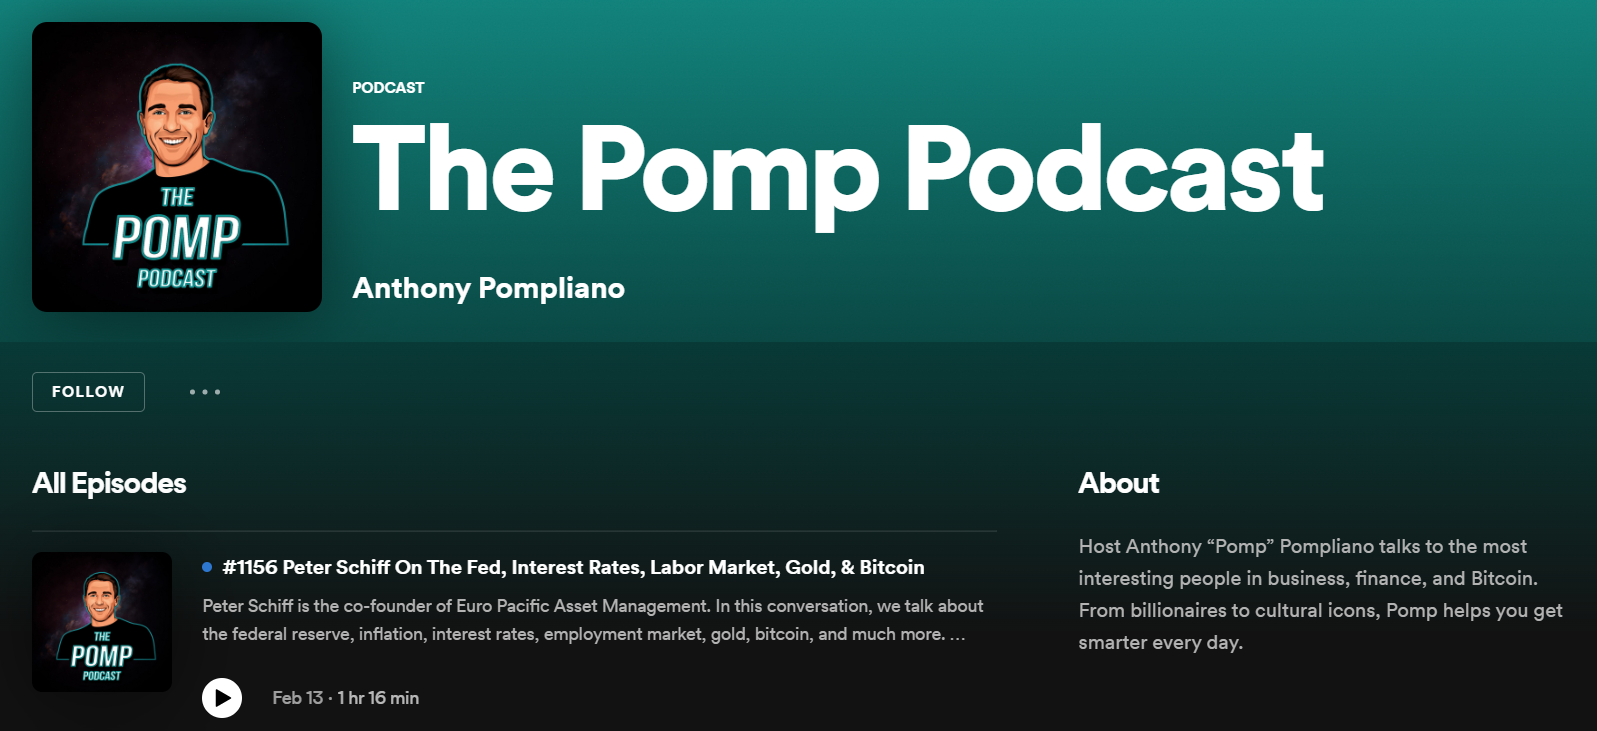 The Pomp Podcast with Anthony Pompliano